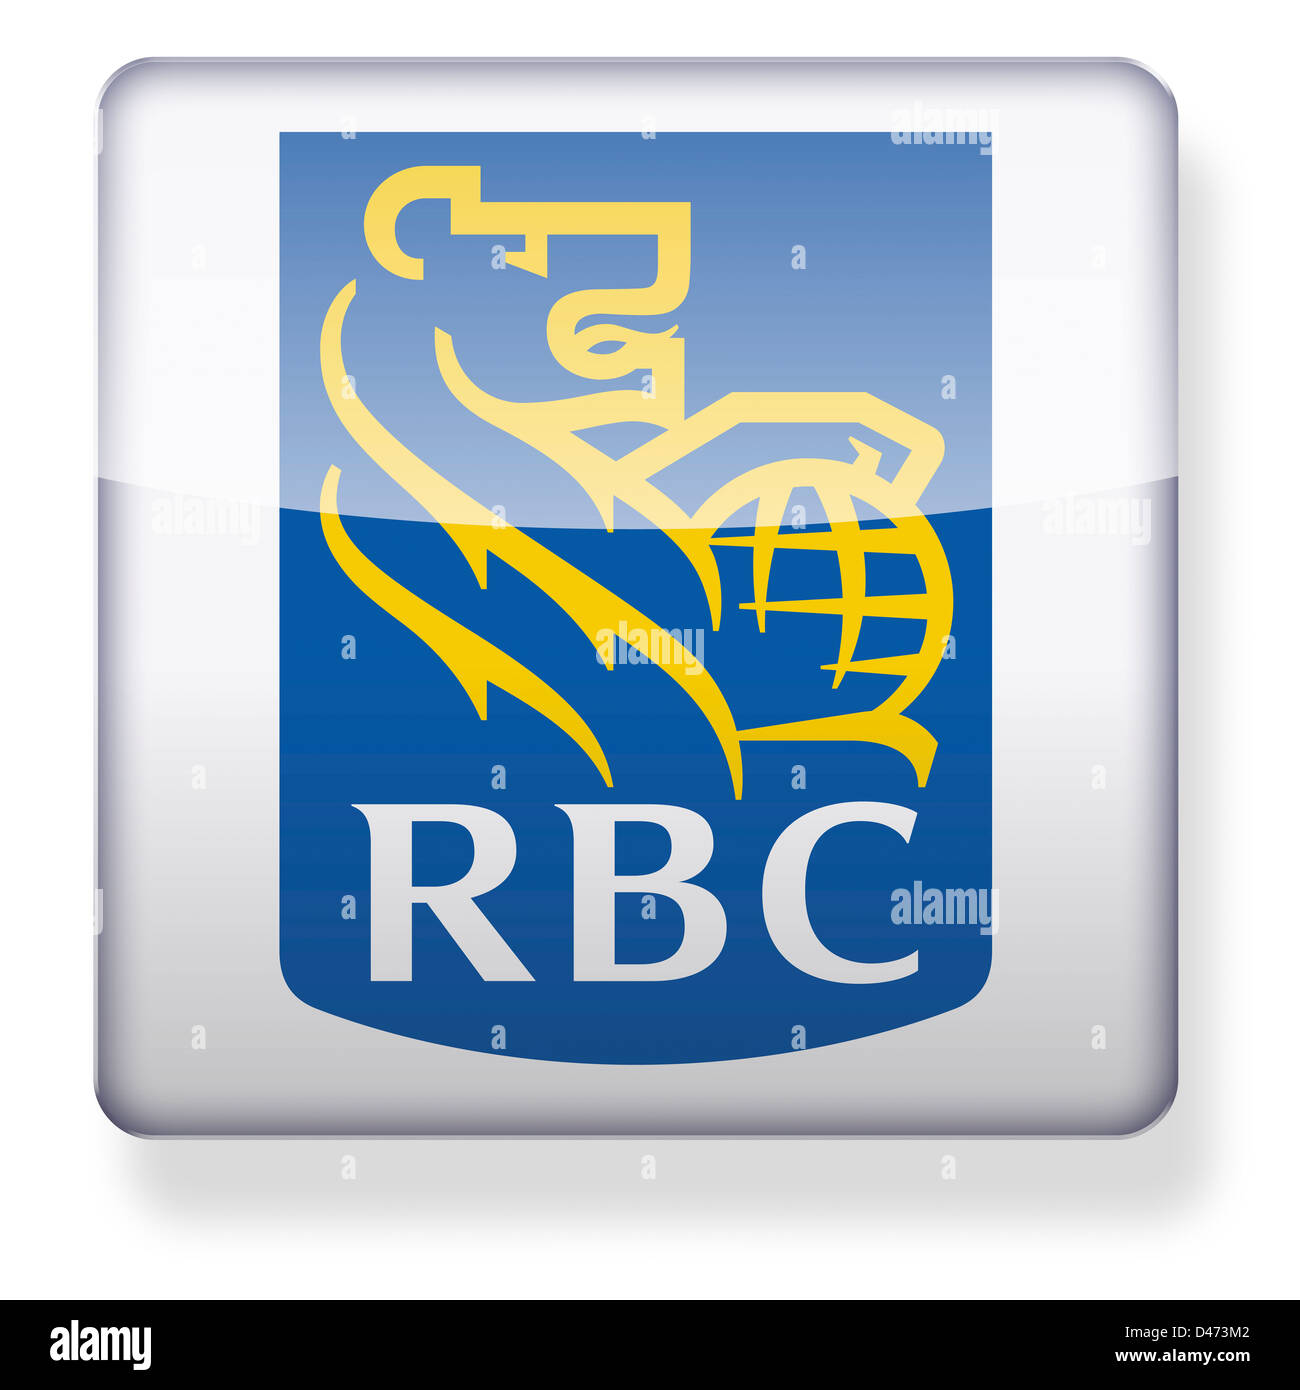 Royal Bank of Canada logo as an app icon. Clipping path included. Stock Photo